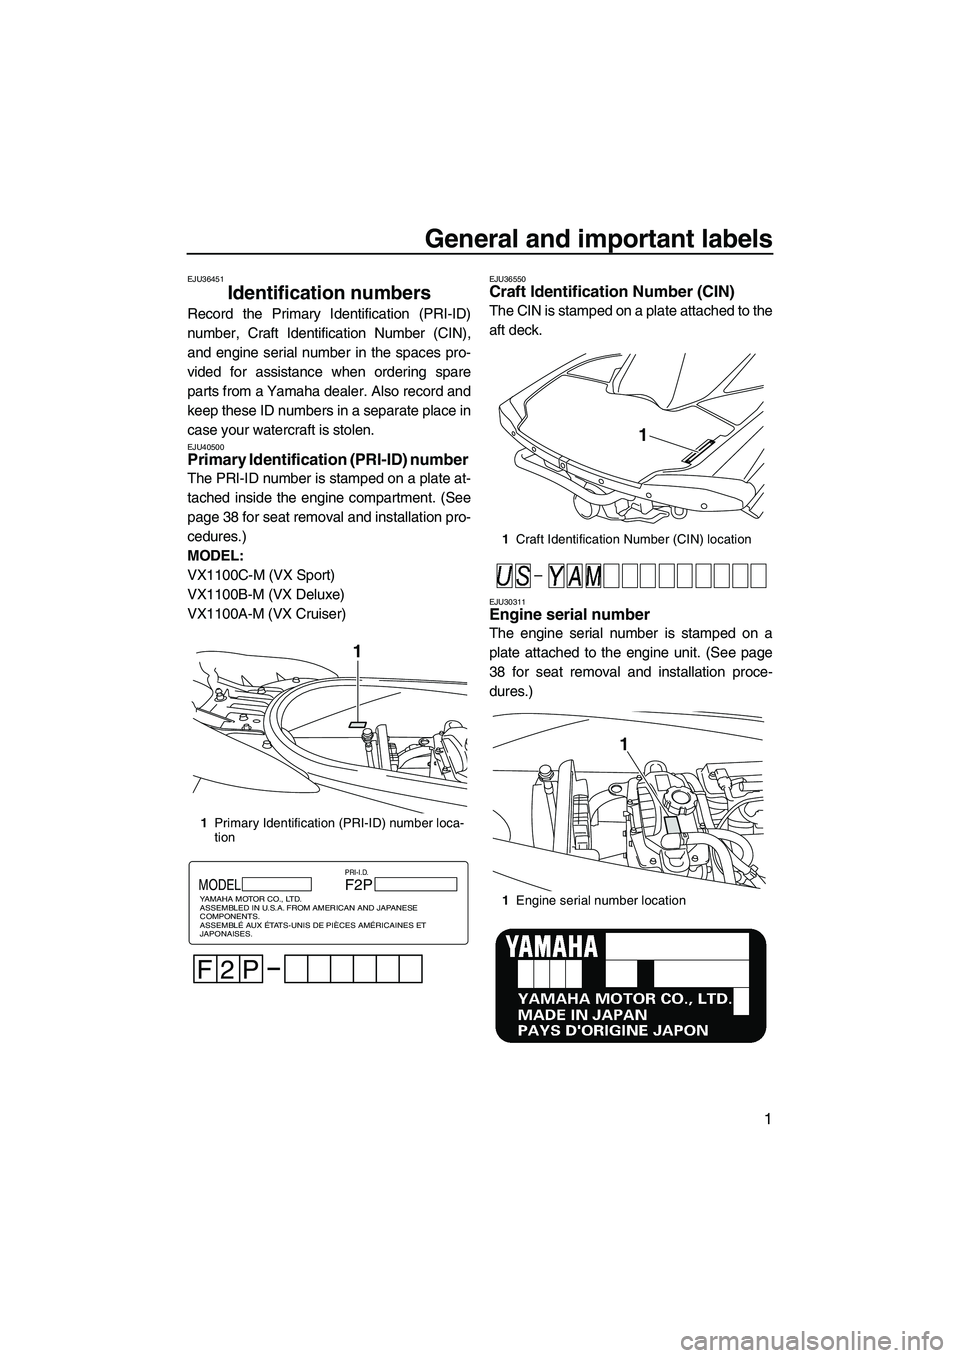 YAMAHA VX SPORT 2013  Owners Manual General and important labels
1
EJU36451
Identification numbers 
Record the Primary Identification (PRI-ID)
number, Craft Identification Number (CIN),
and engine serial number in the spaces pro-
vided 